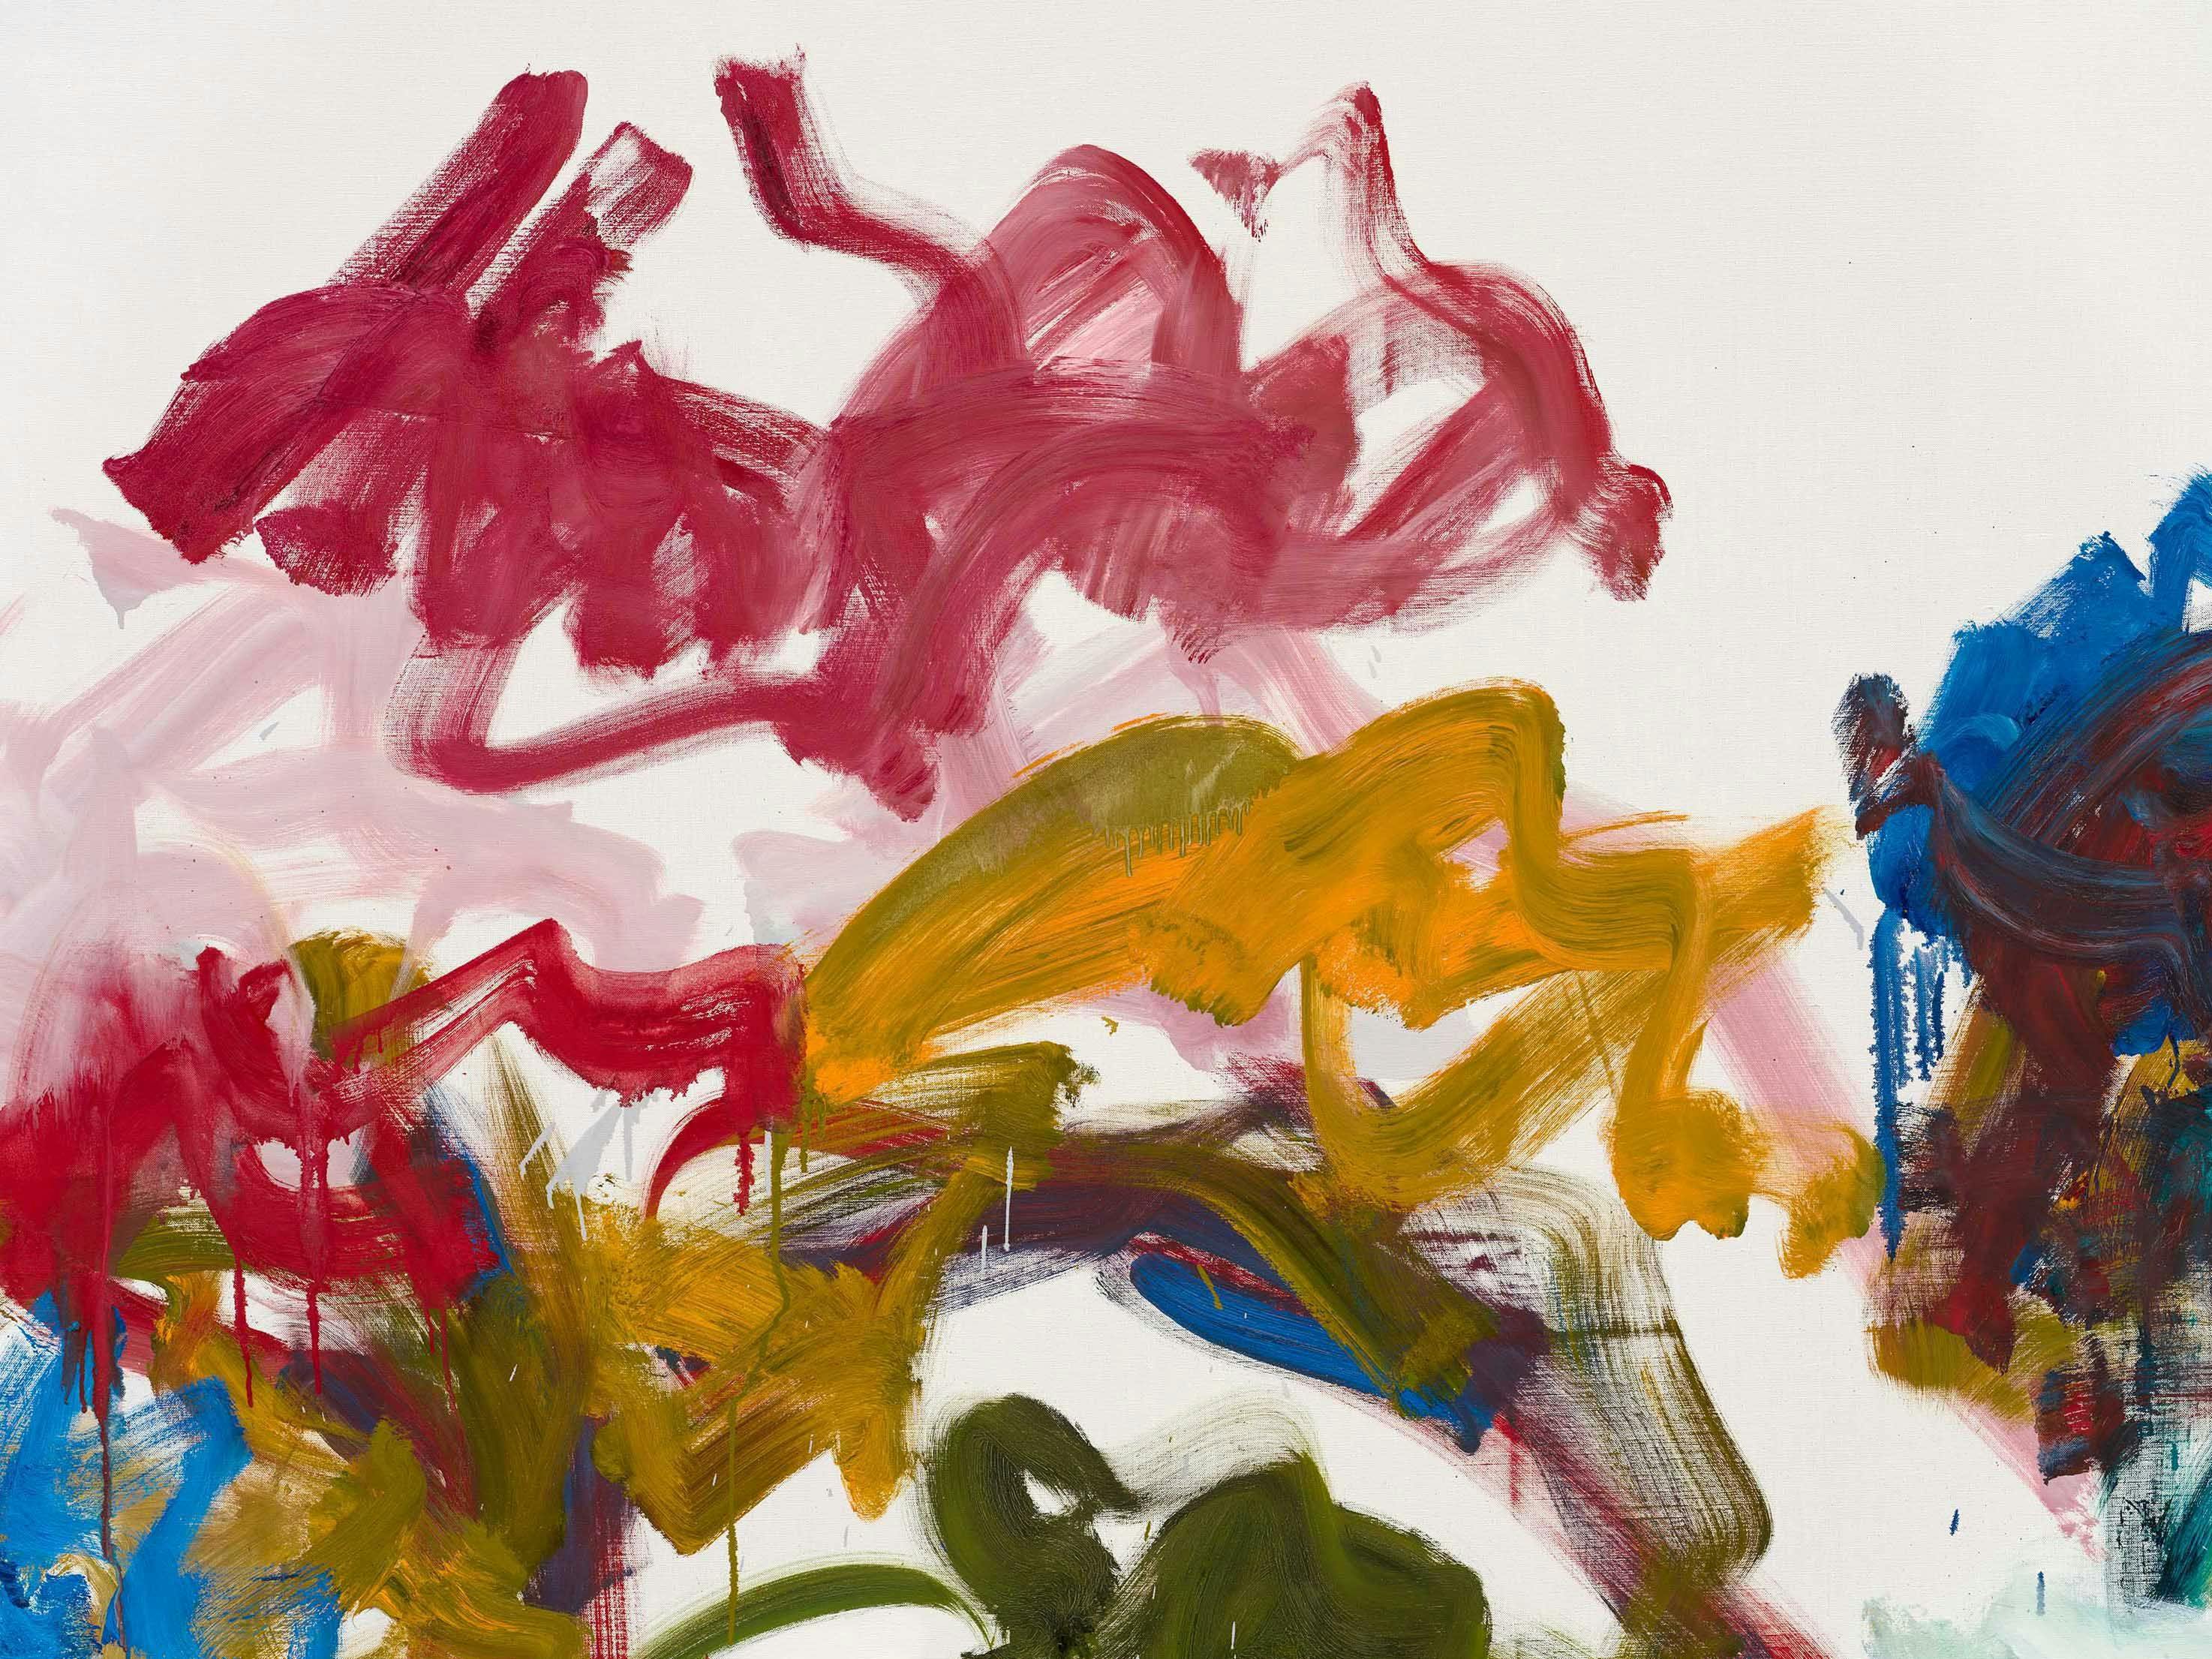 A detail from a painting by Joan Mitchell, titled Sunflowers, 1990 to 1991.